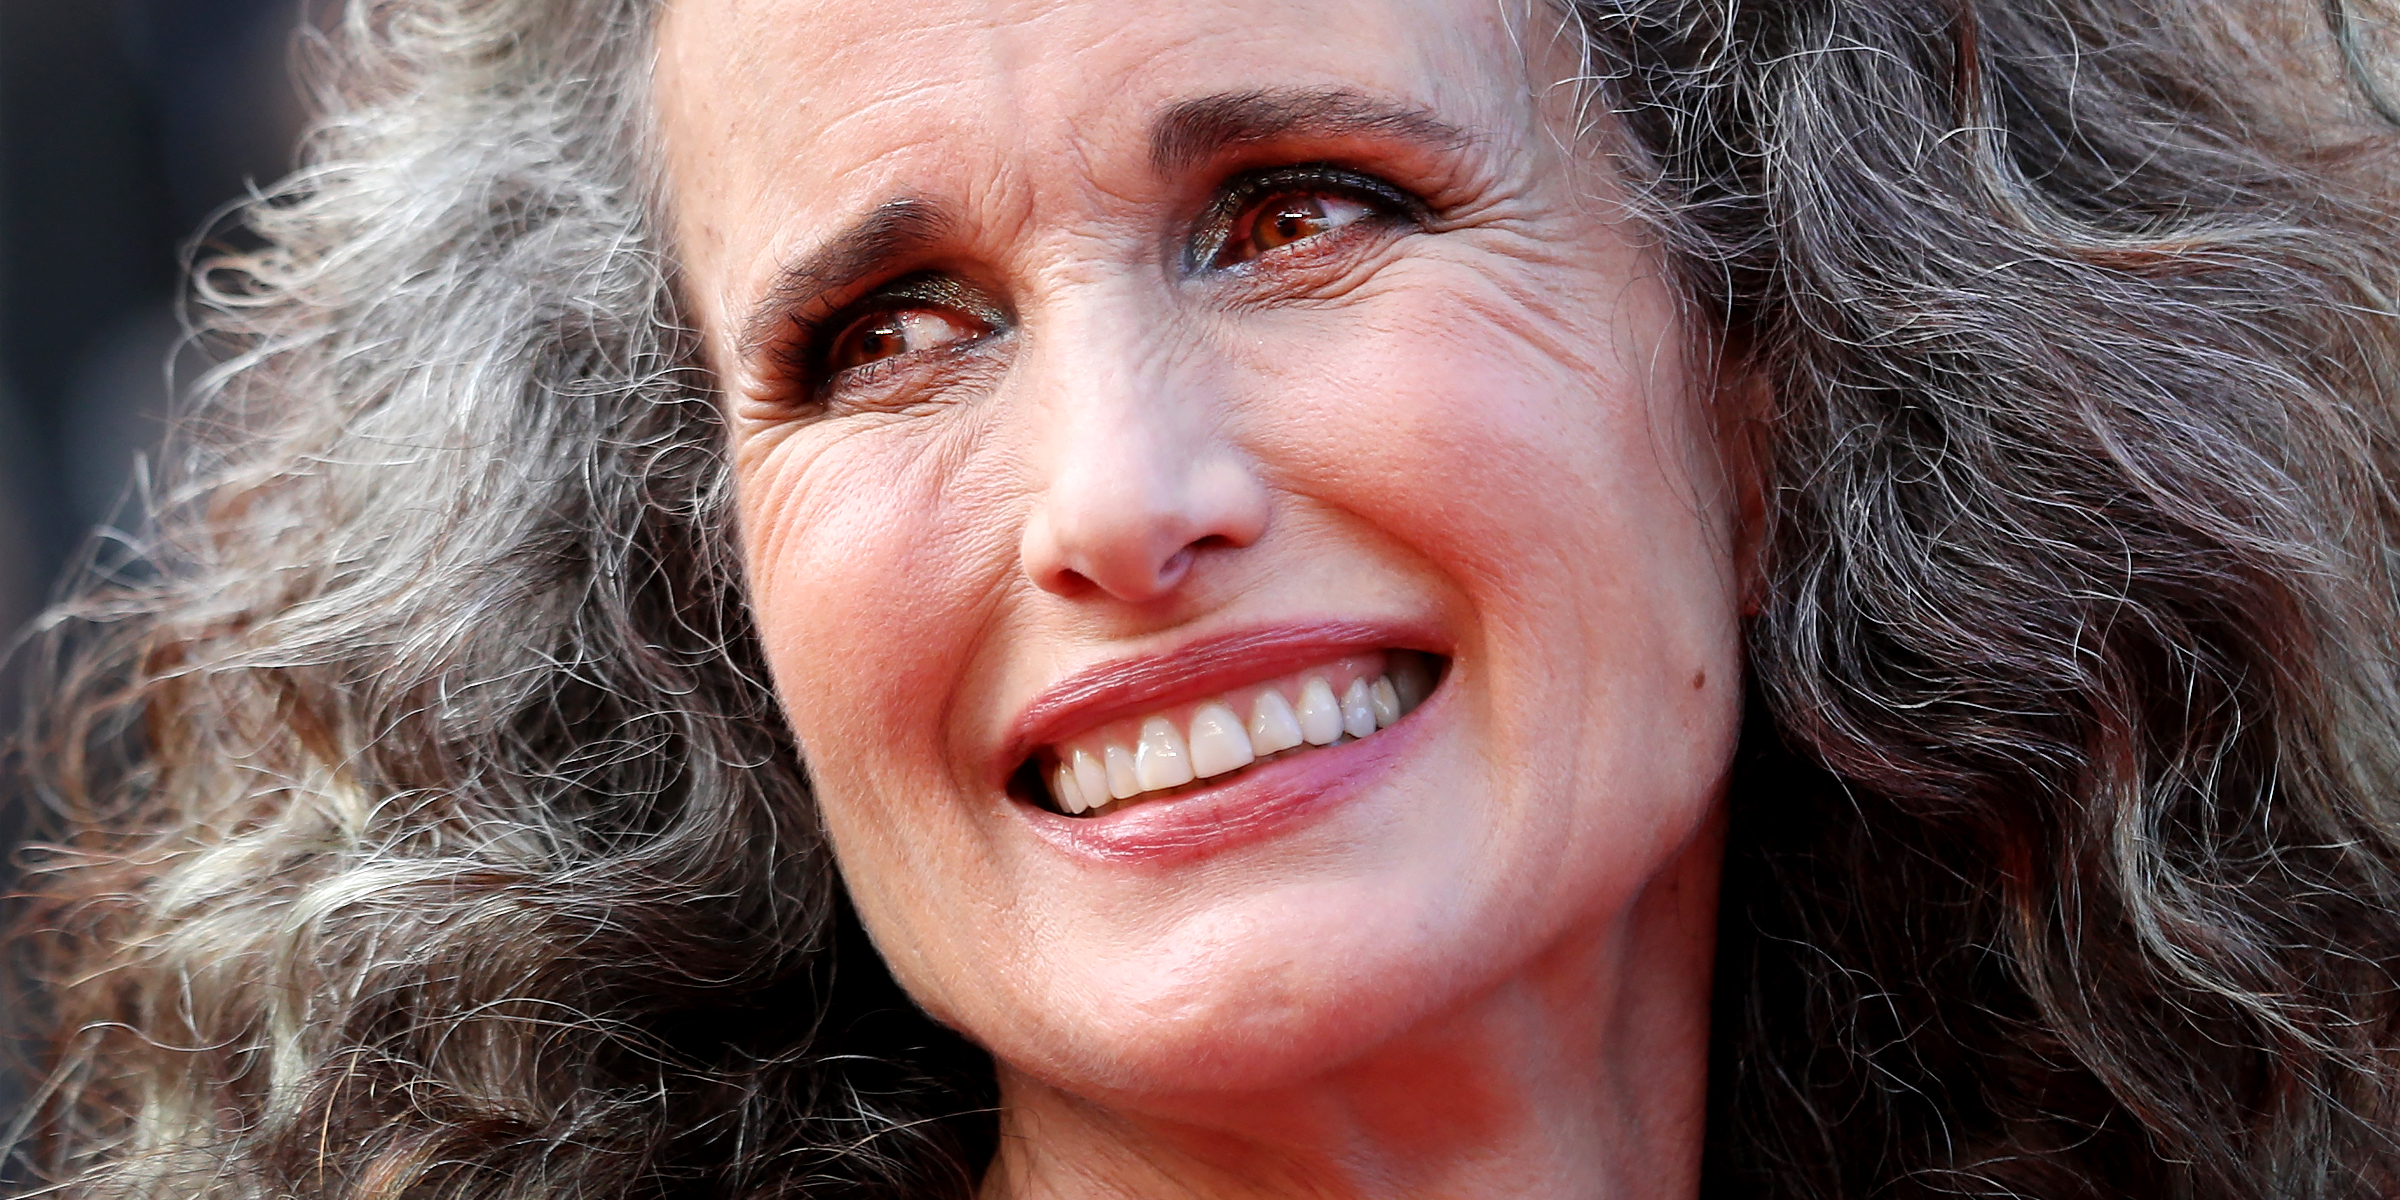 Andie MacDowell | Source: Getty Images